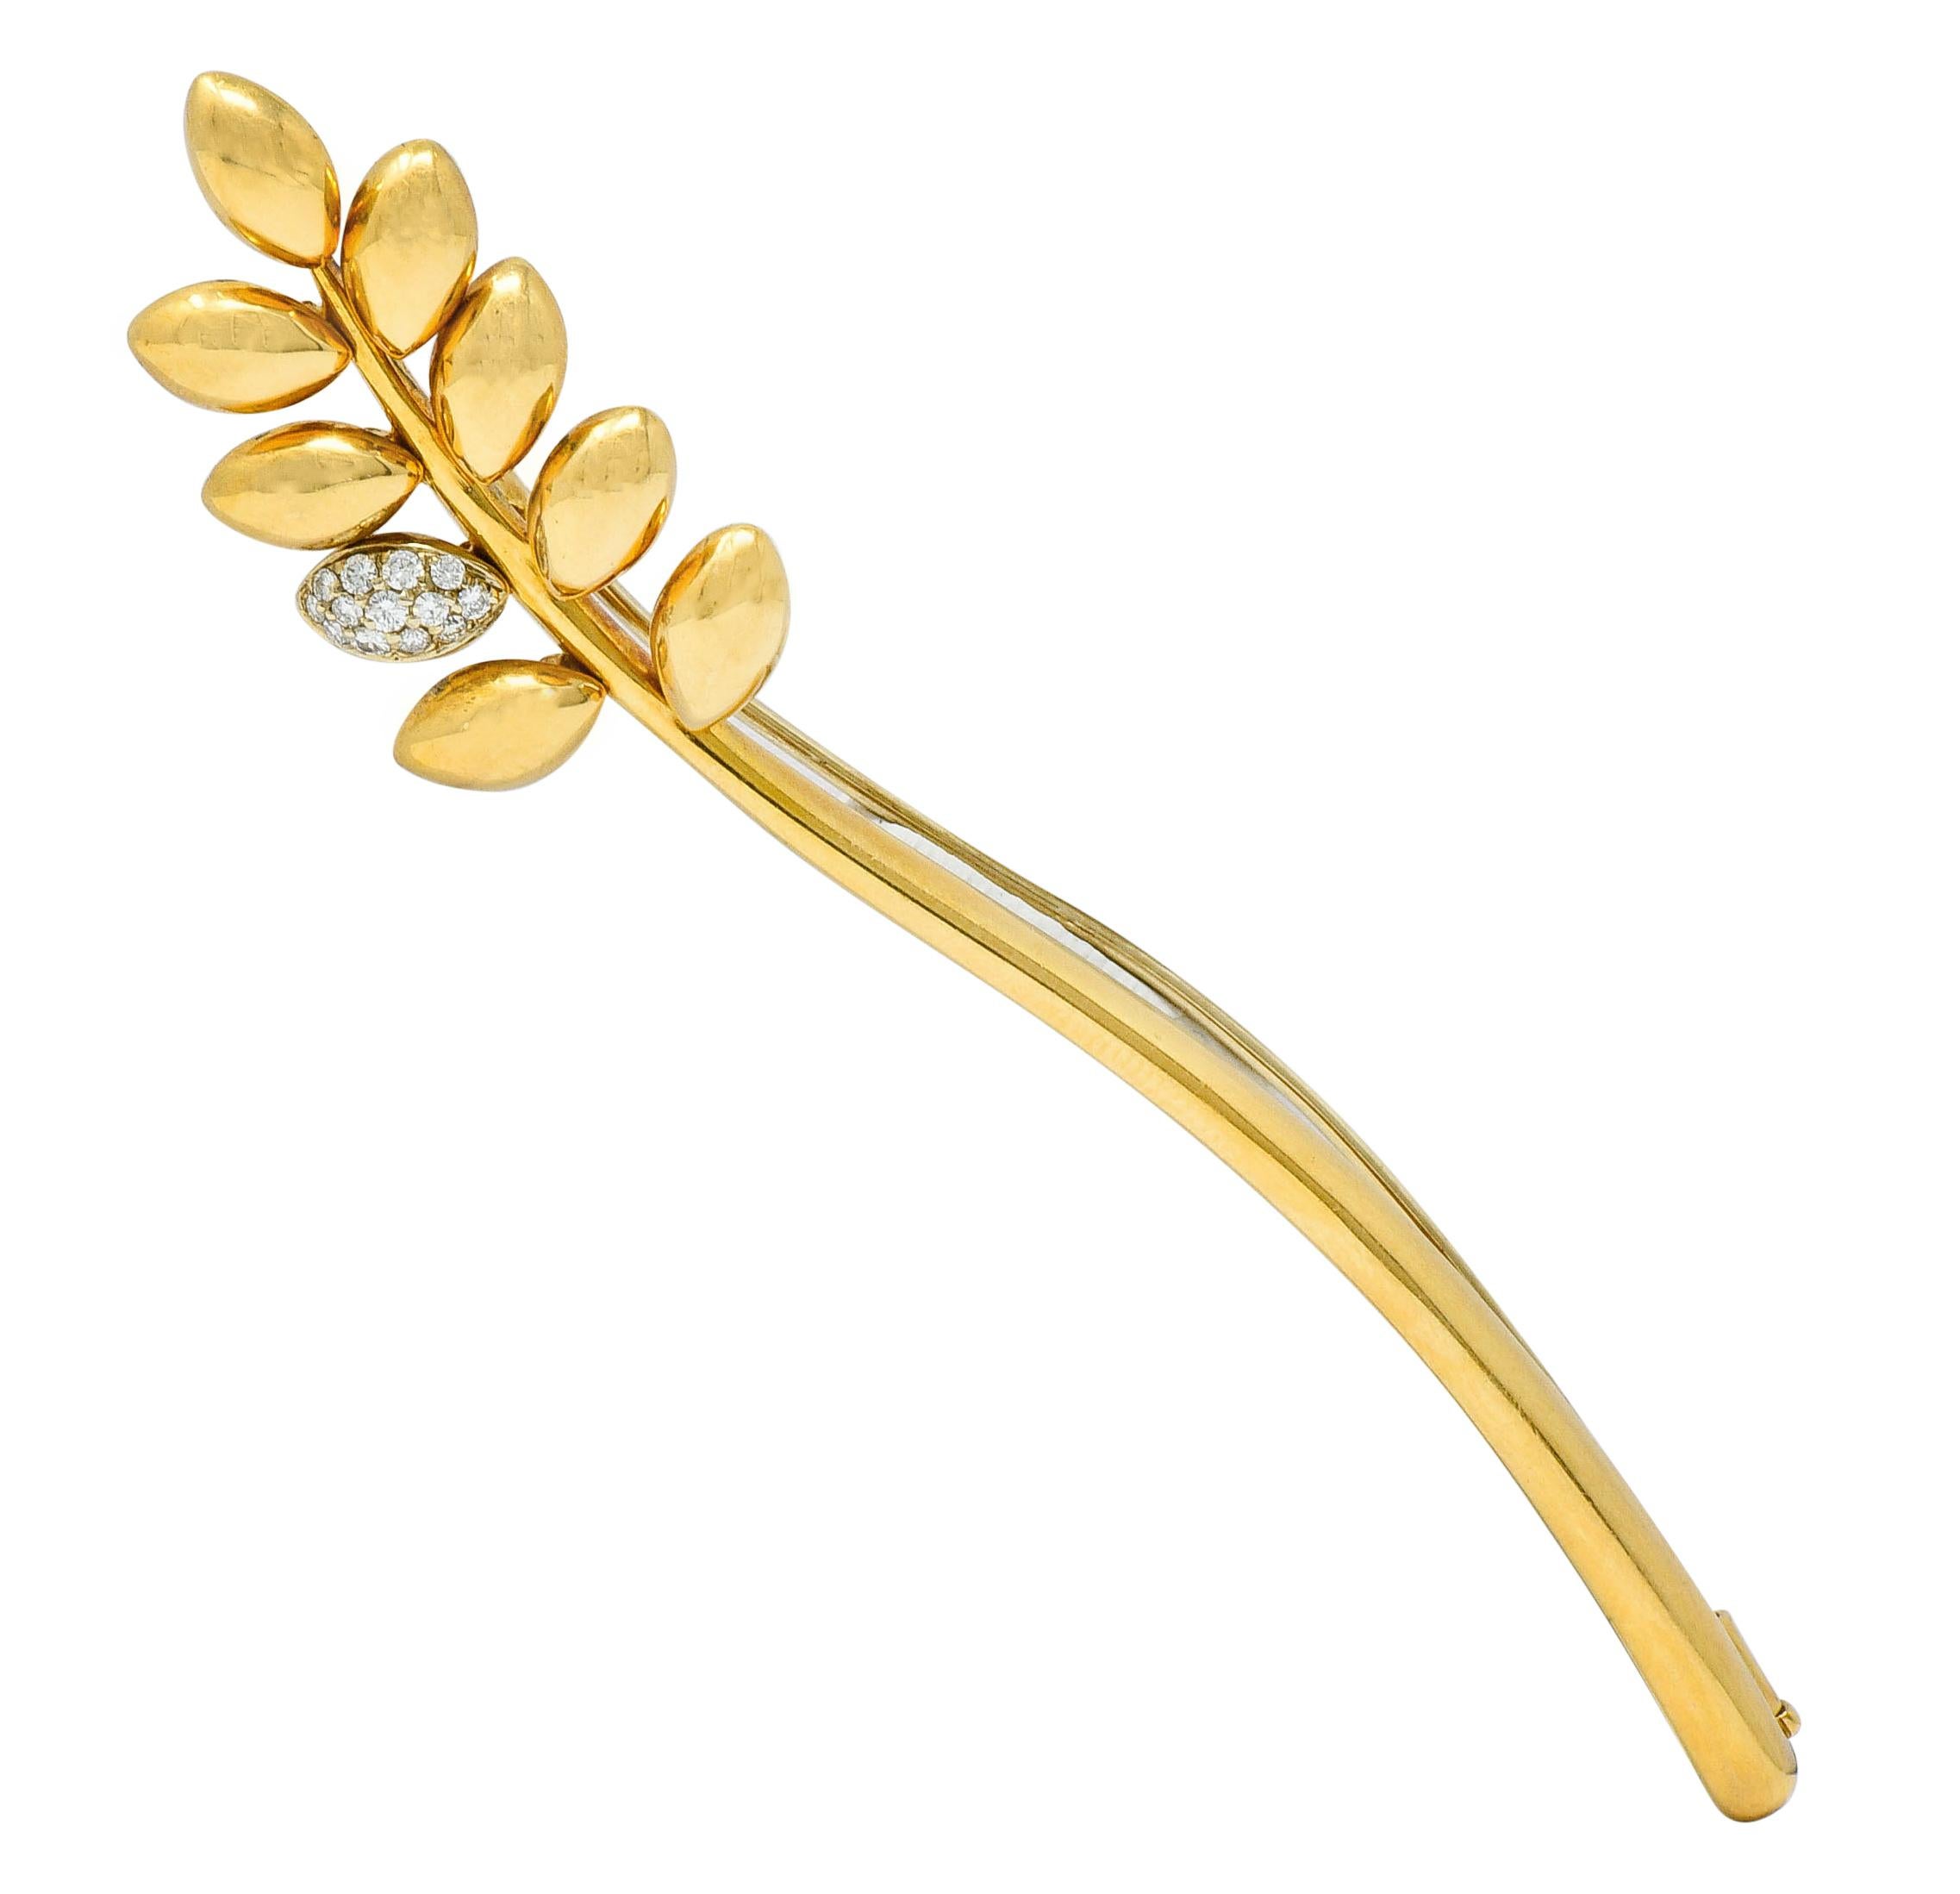 Brooch is designed as a single strand of stylized wheat

With articulation throughout polished gold grains

One grain is pavè set with round brilliant cut diamonds

Weighing in total approximately 0.20 carat; eye-clean and white

With maker's mark